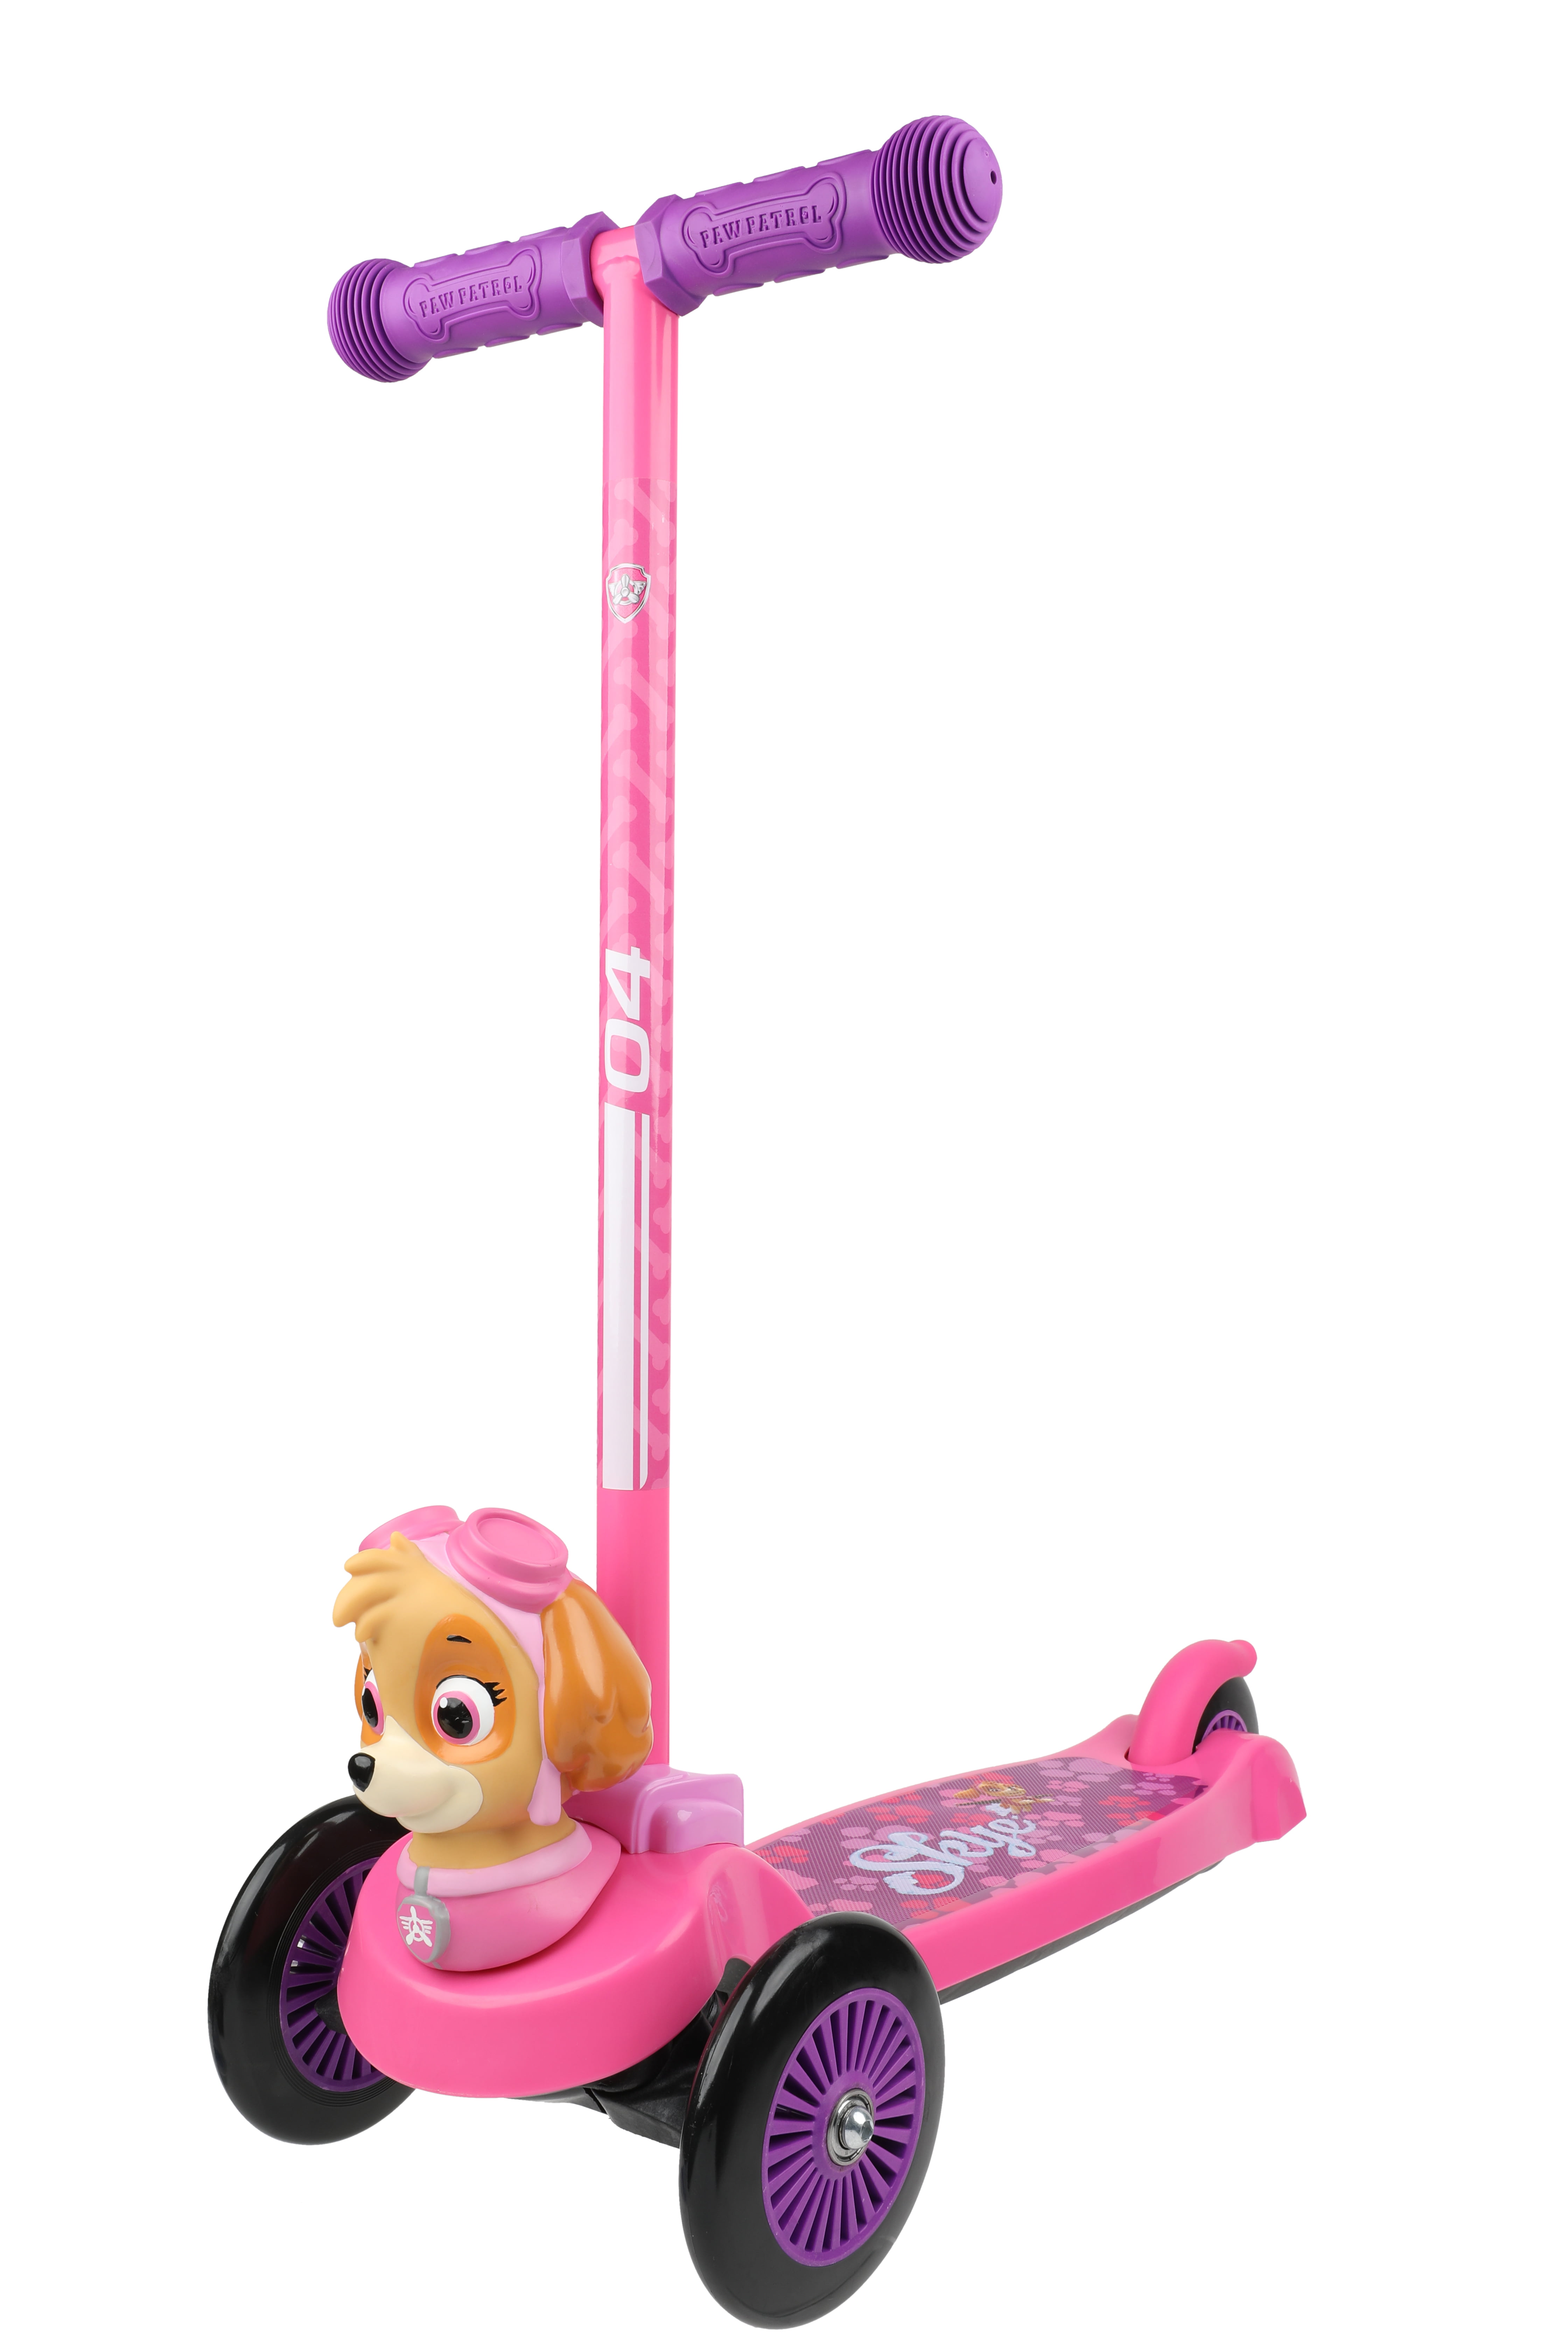 Paw Patrol Skye 3d Scooter with 3 